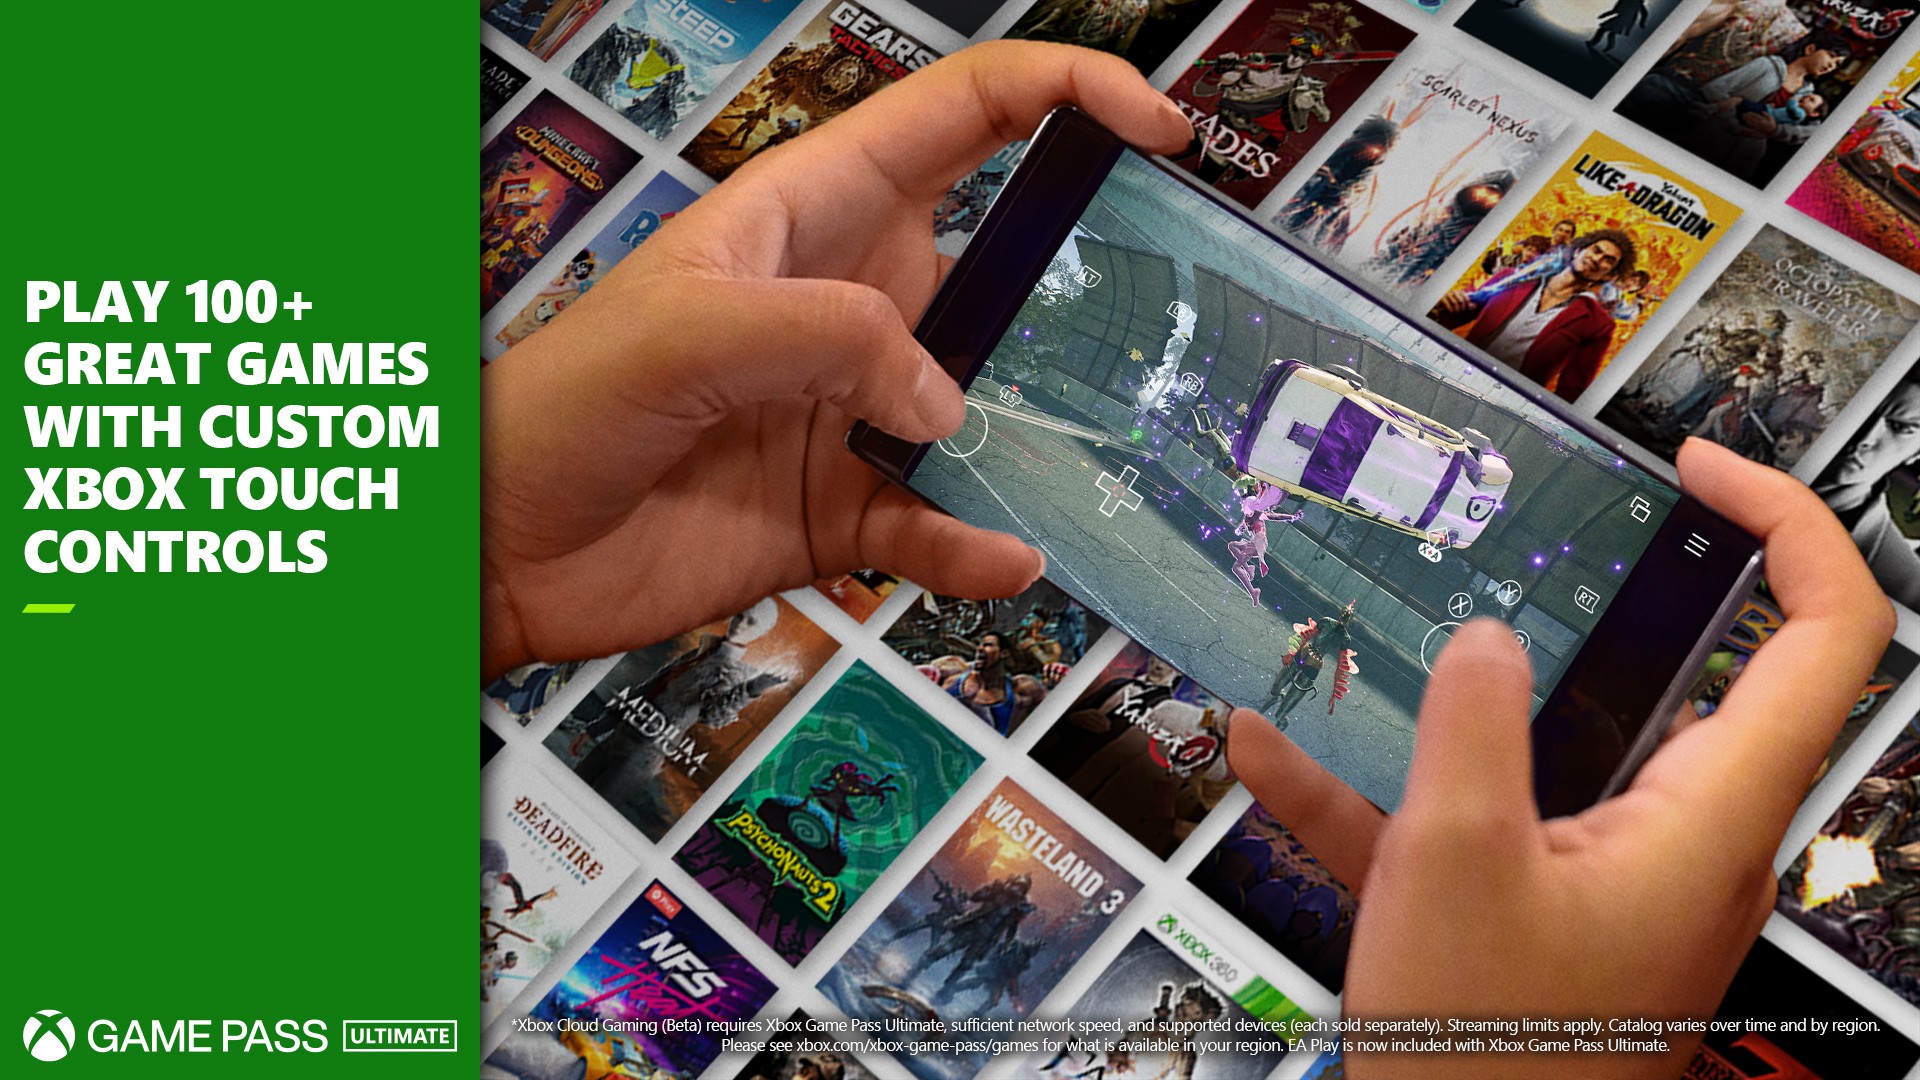 Xbox Game Pass Adding 13 More Games This Month, Including 8 New